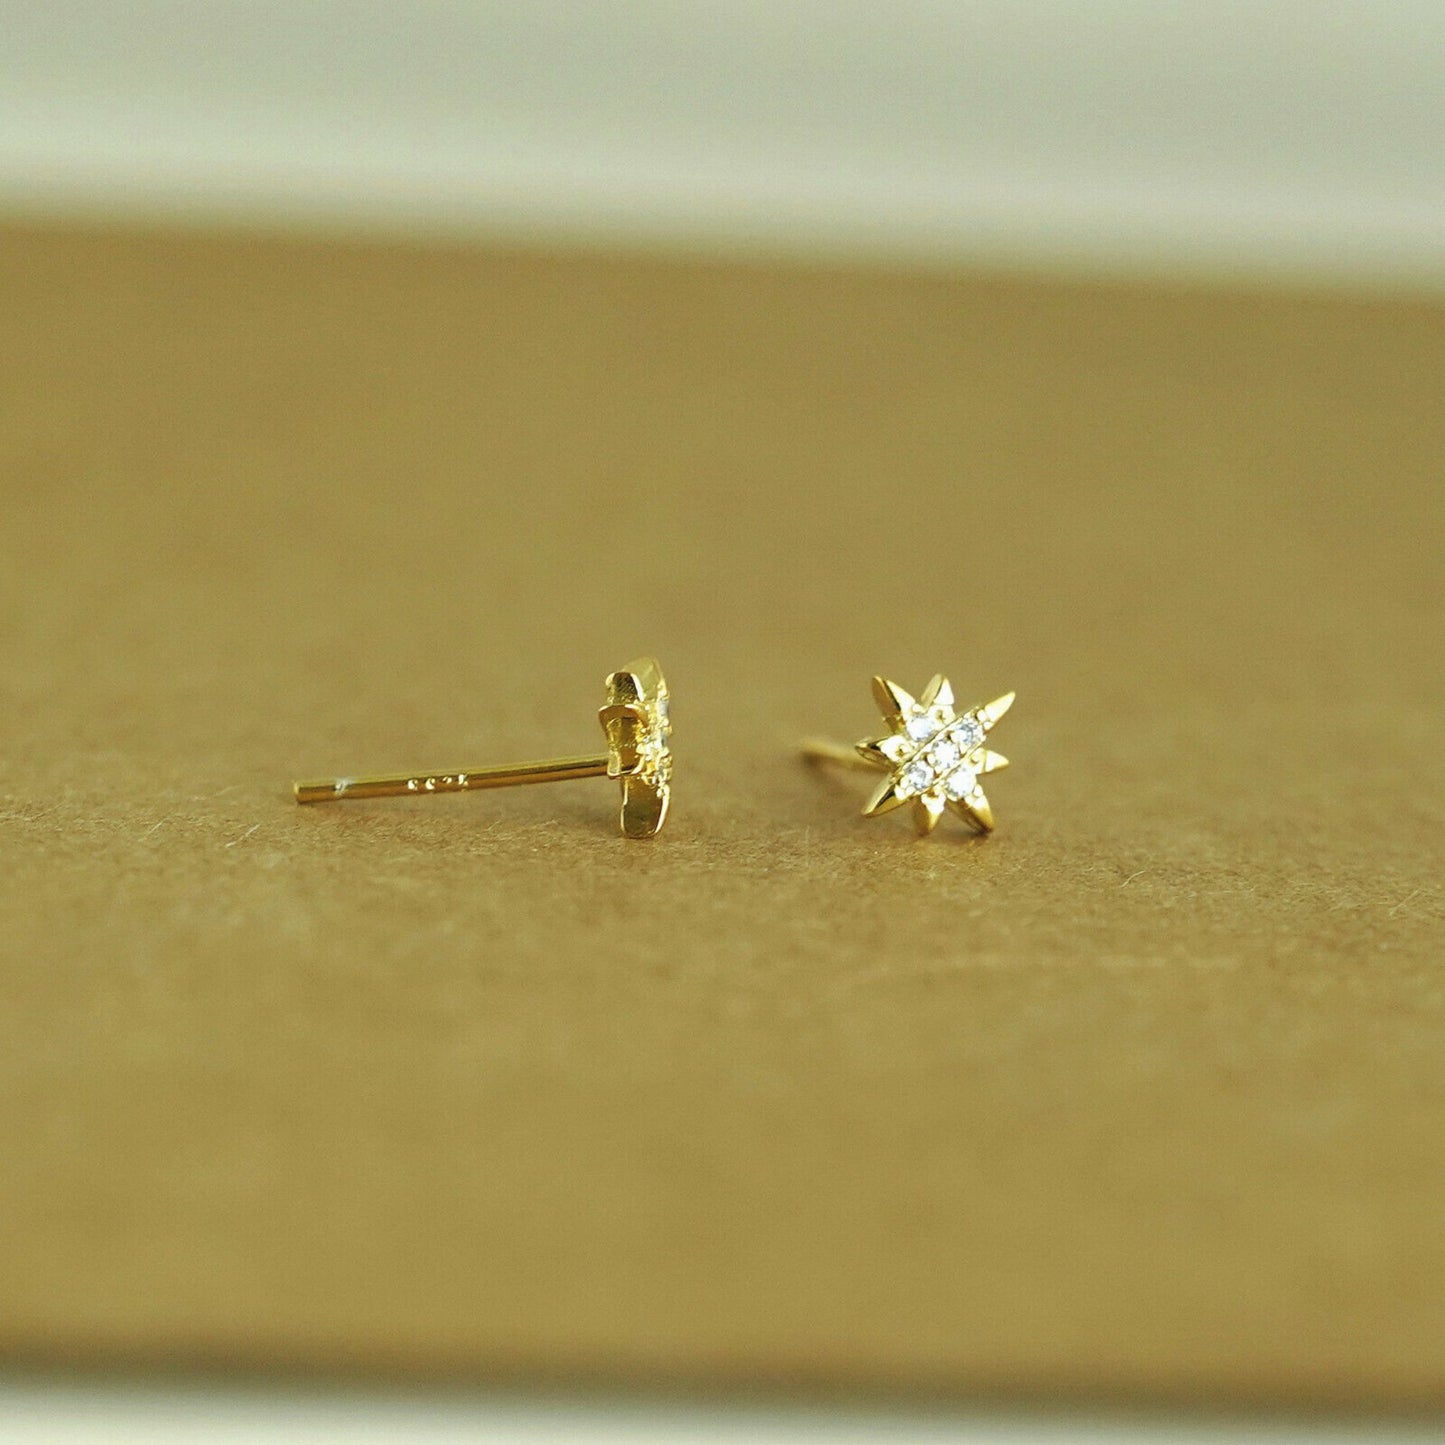 Star Stud Earrings in 18K Gold Plated Sterling Silver with CZ North Pole Design